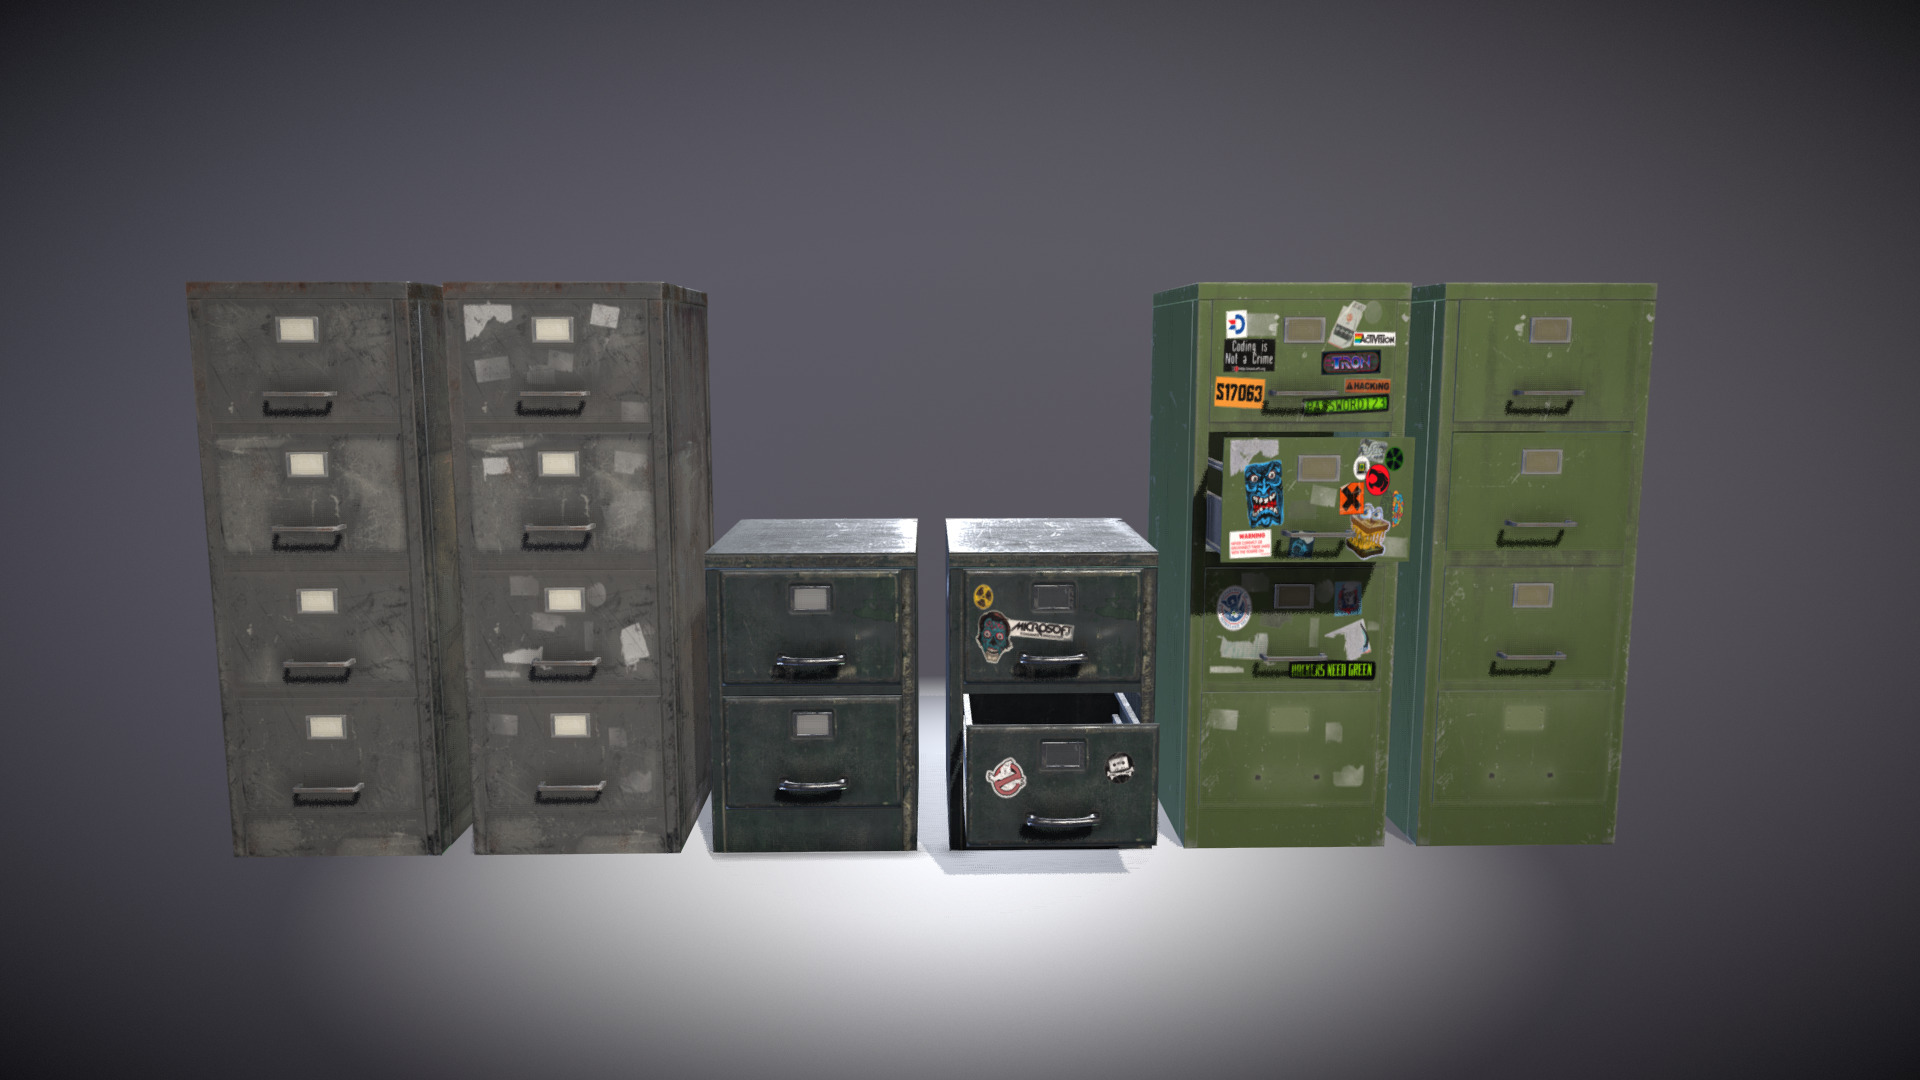 3D model Filing Cabinets - This is a 3D model of the Filing Cabinets. The 3D model is about a group of computer servers.